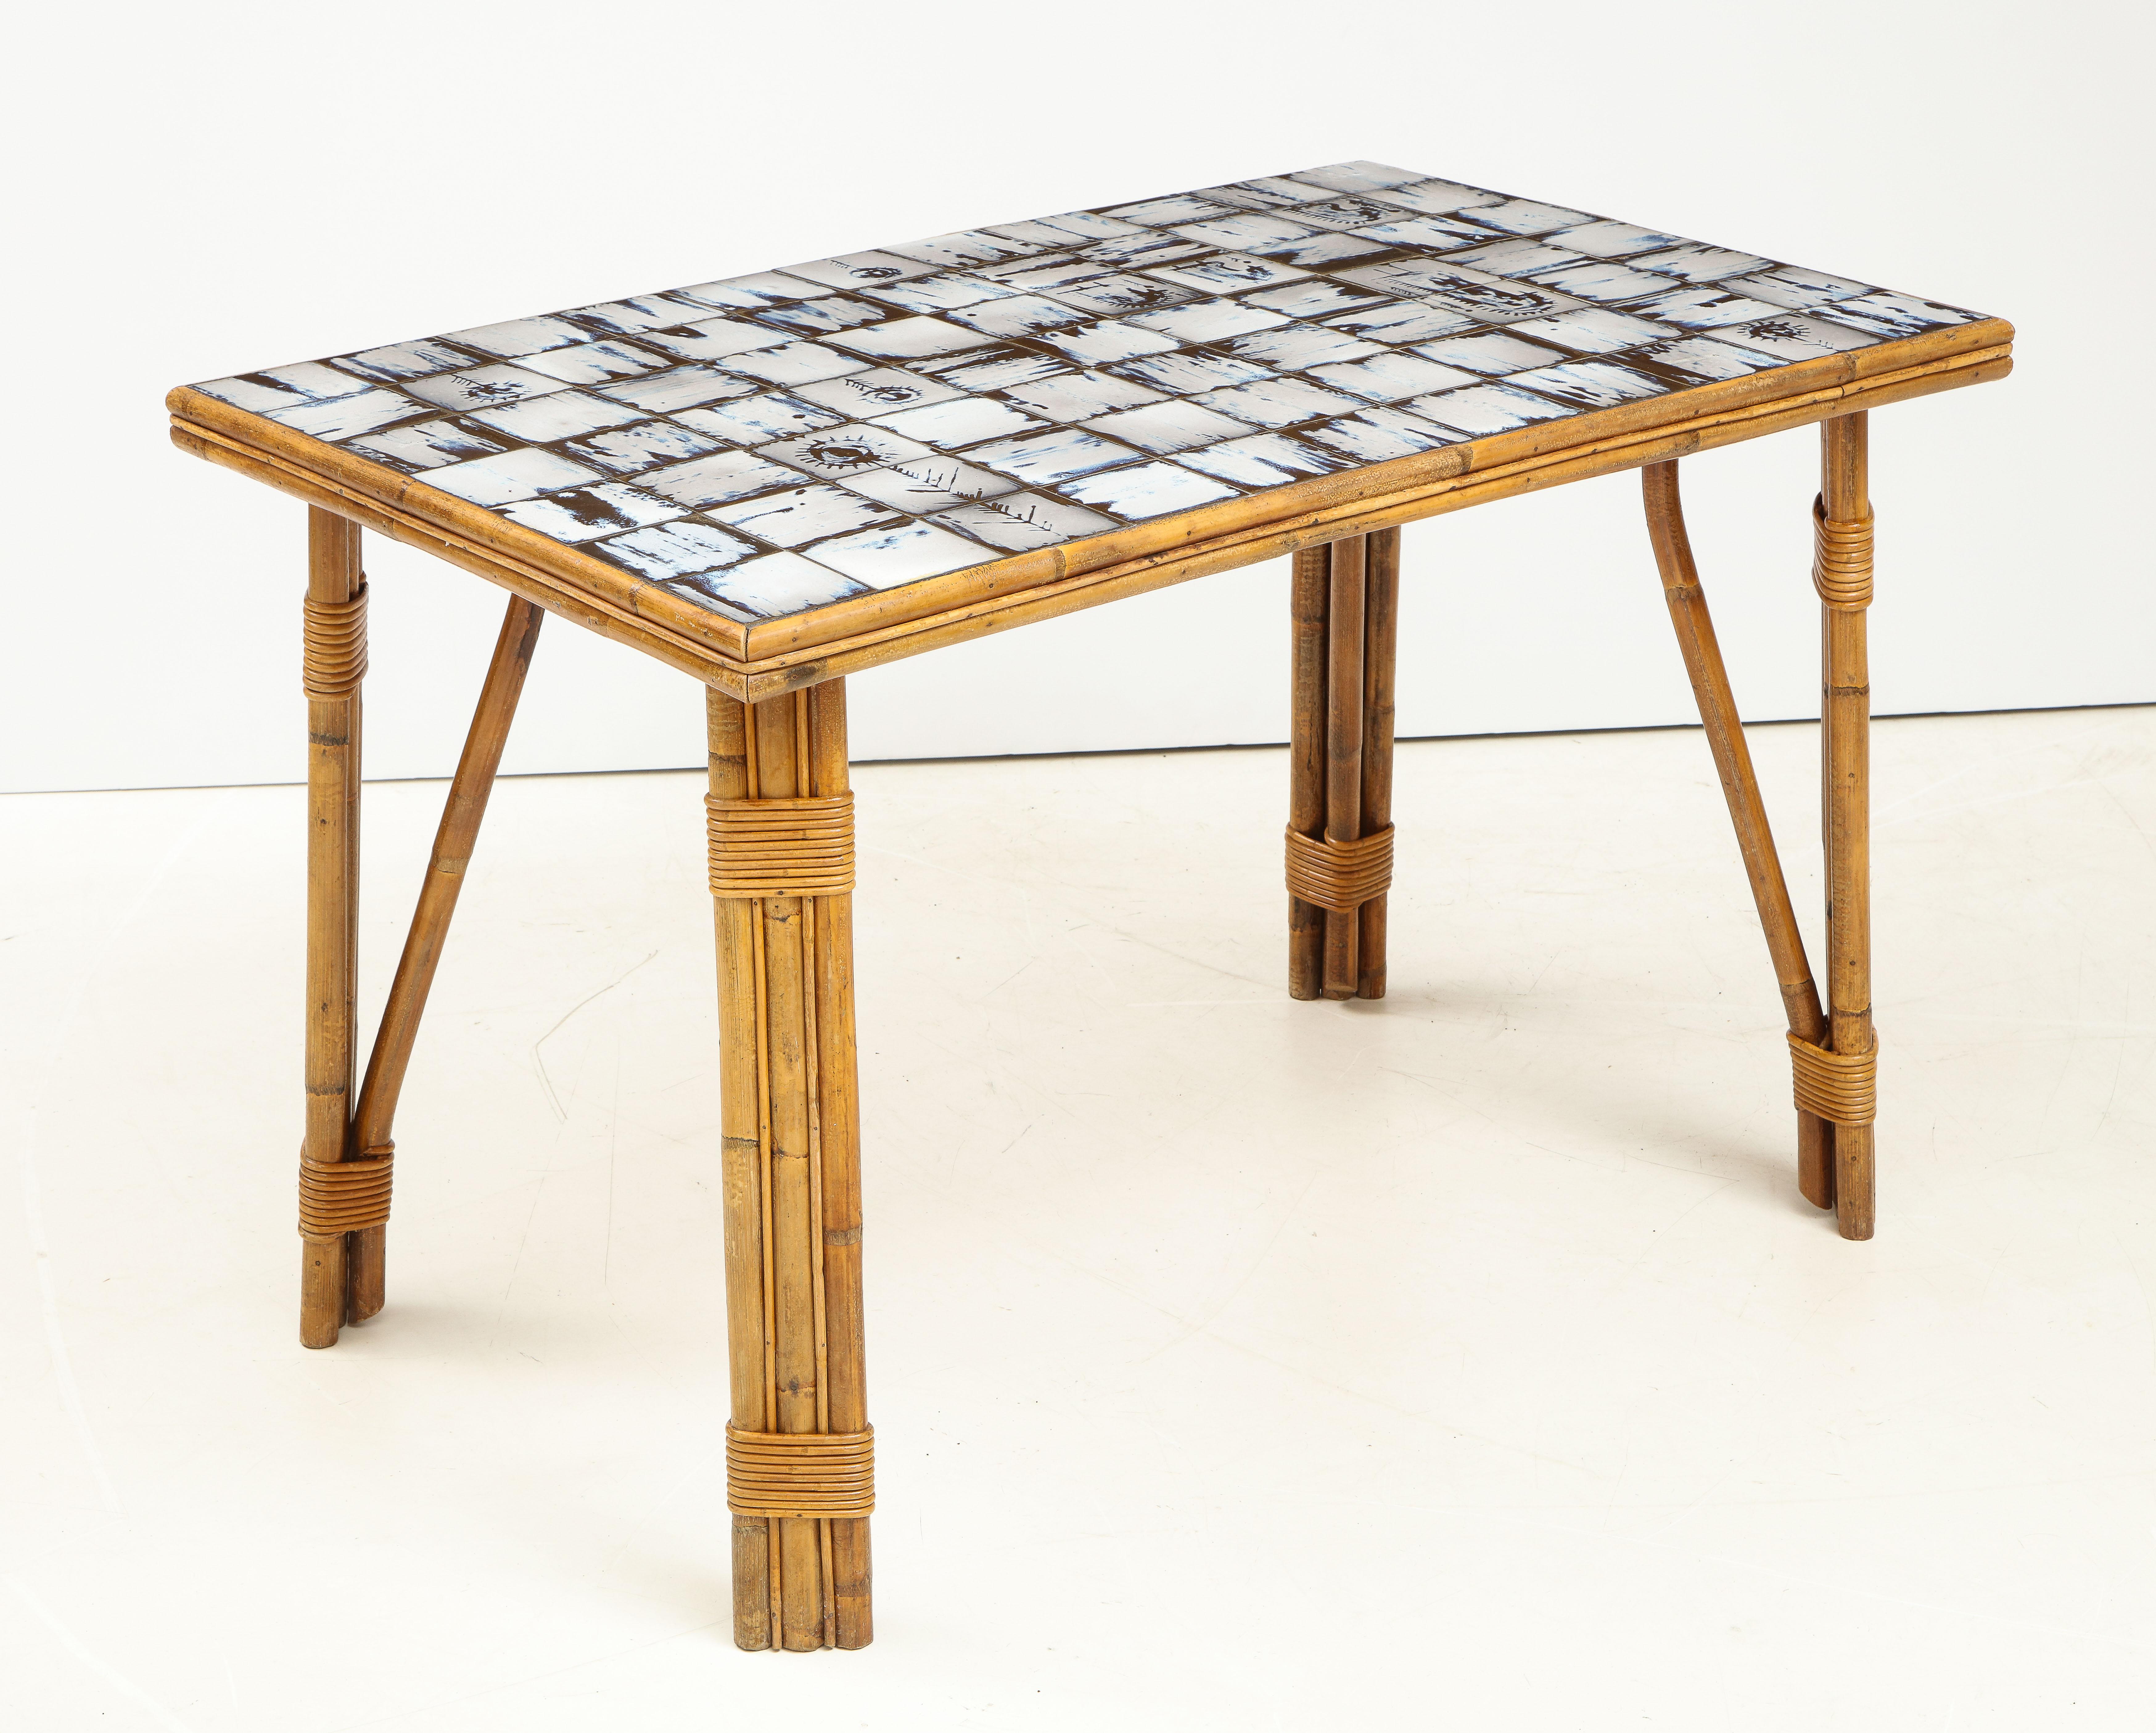 French Rattan Dining Table with Hand-Painted Ceramic Tile Top, France, circa 1950